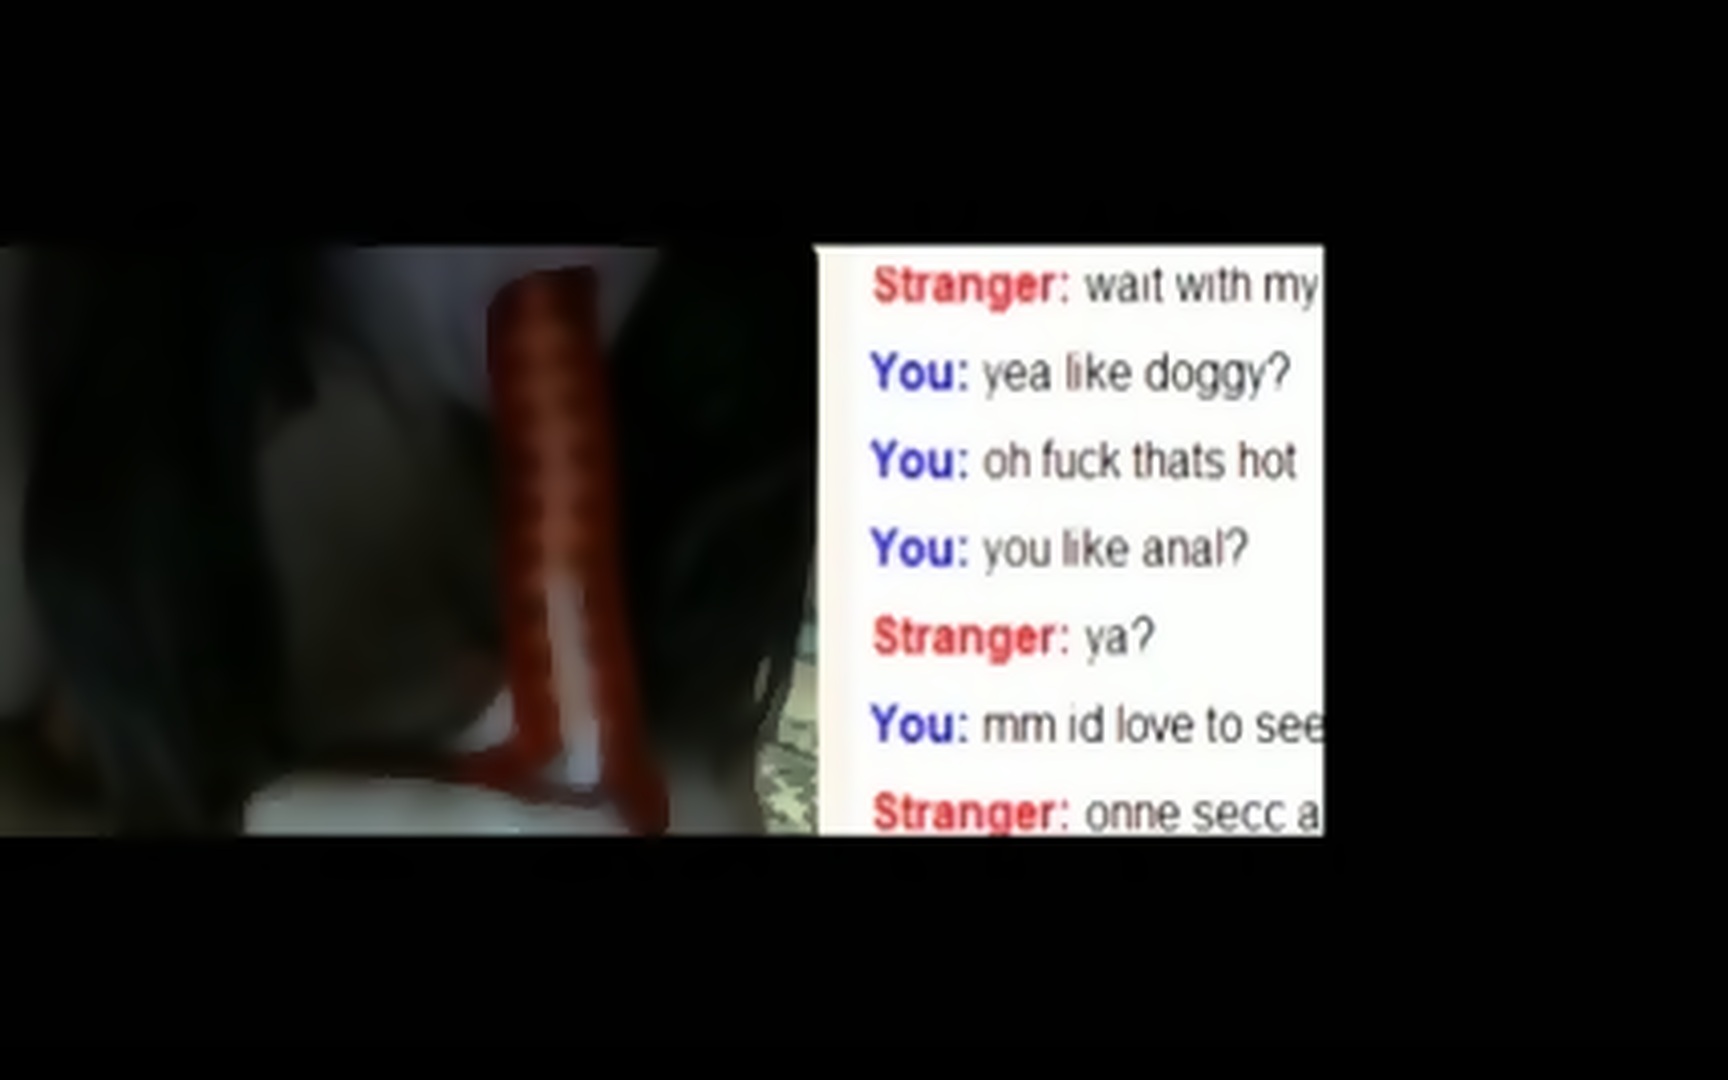 Anal omegle